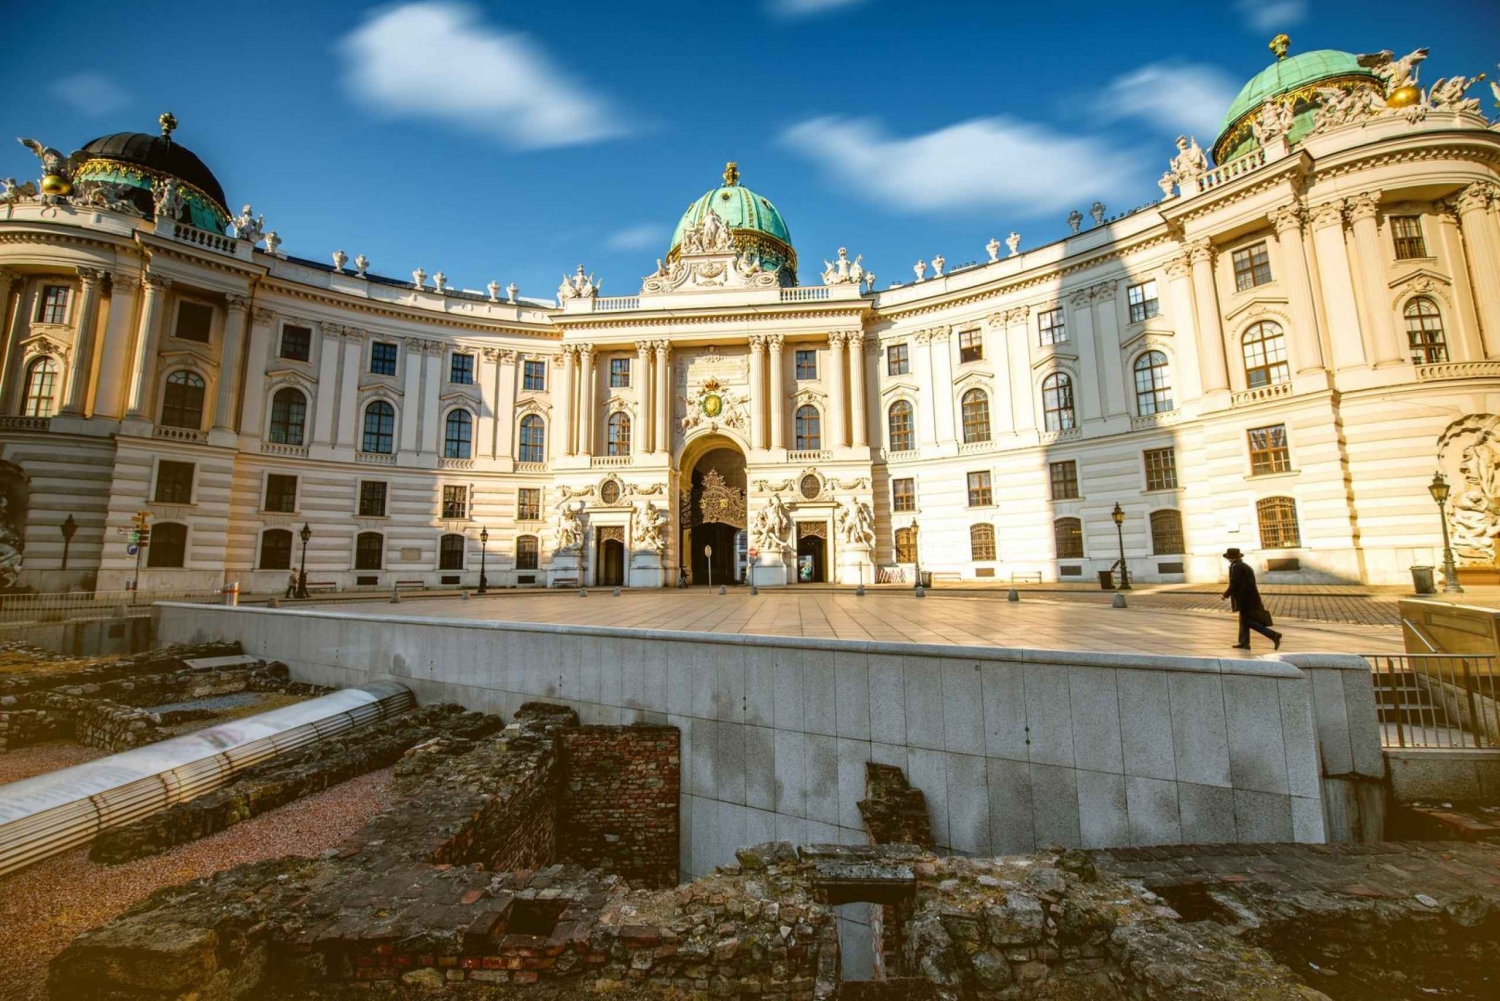 First Time in Vienna: Walking In-App Audio (ENG)